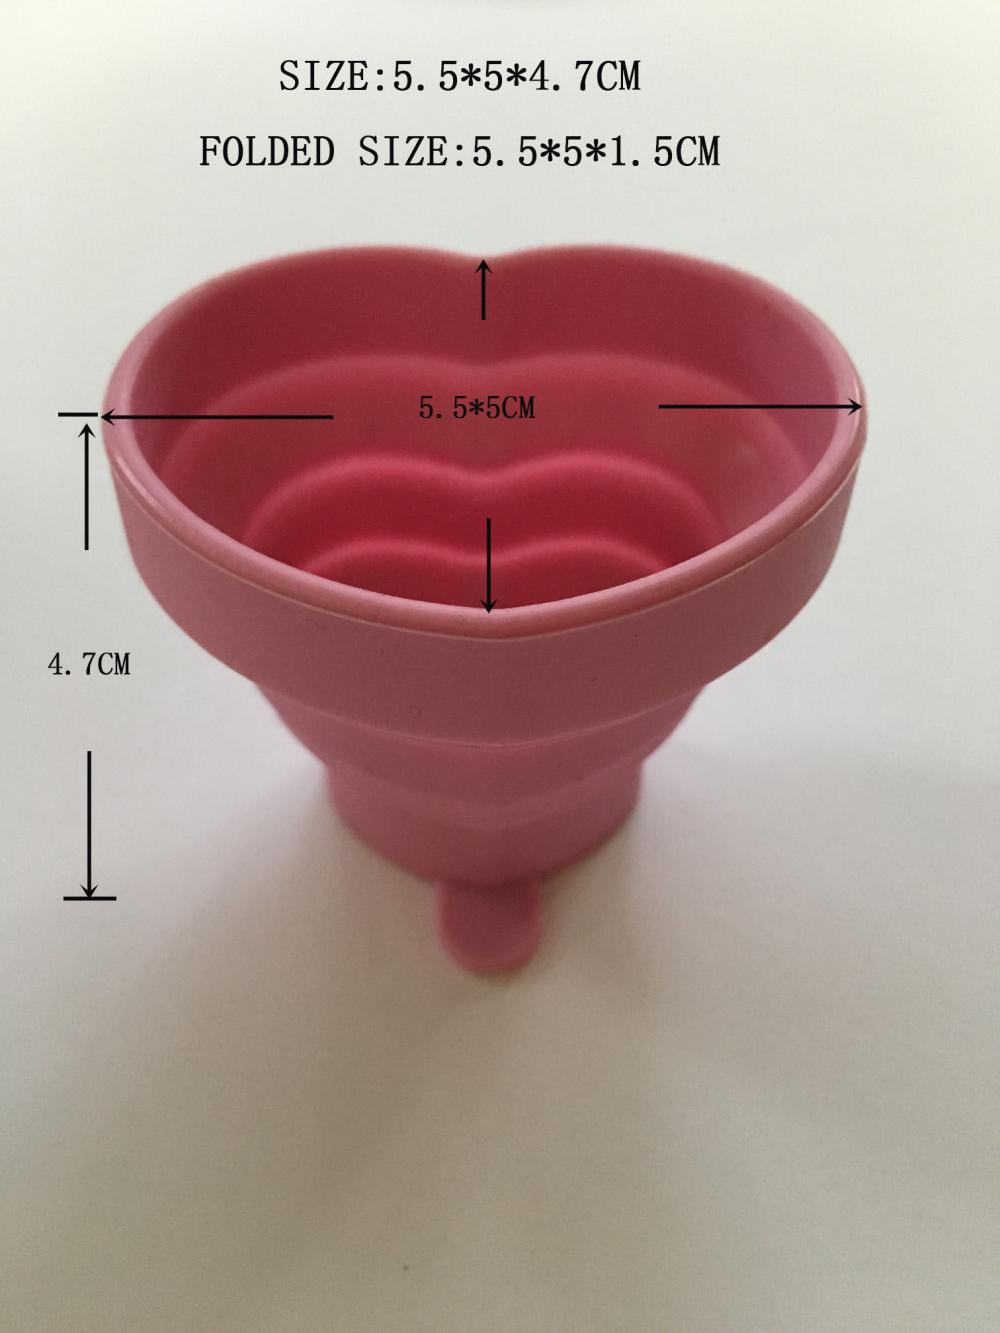 Portable Silicone Coffee Cup